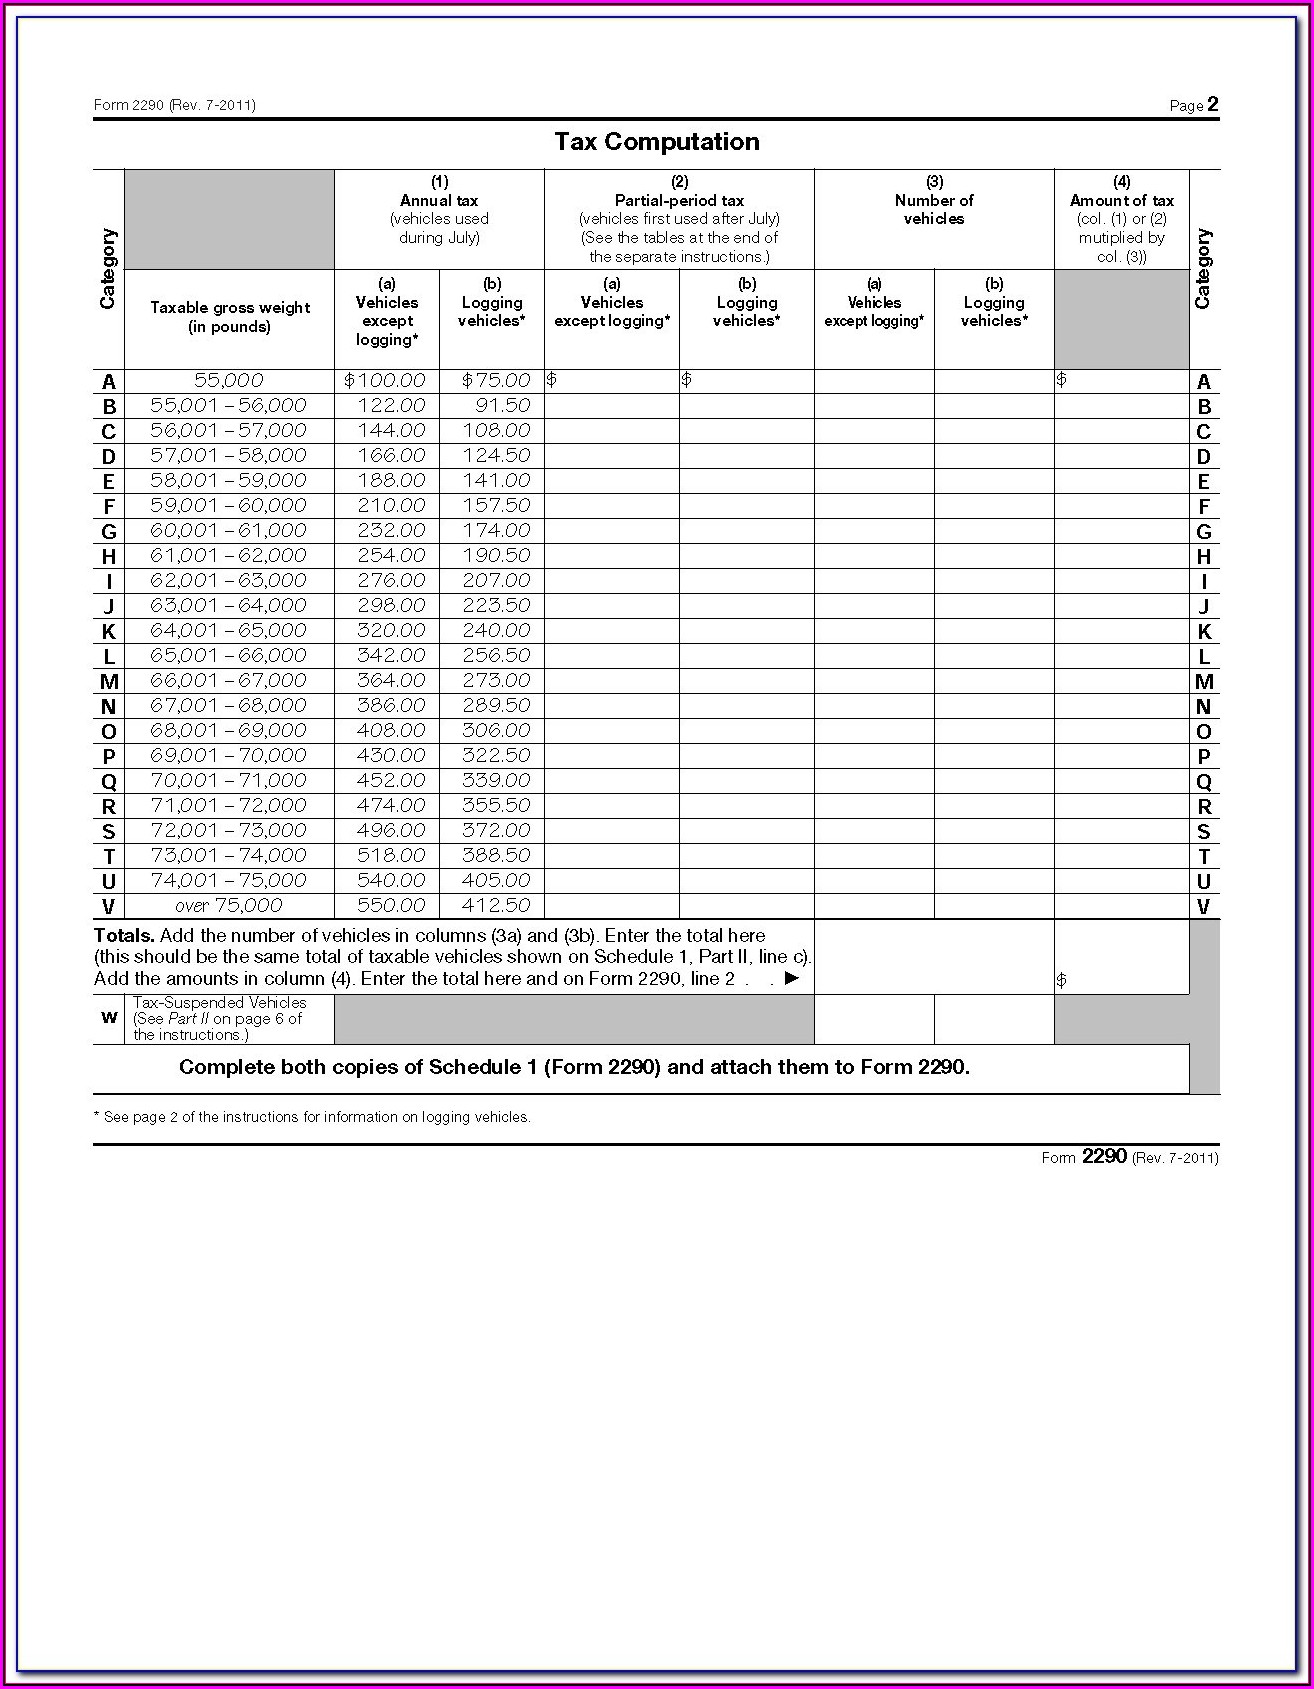 instructions-for-form-2290-schedule-1-form-resume-examples-qj9ep5g2my